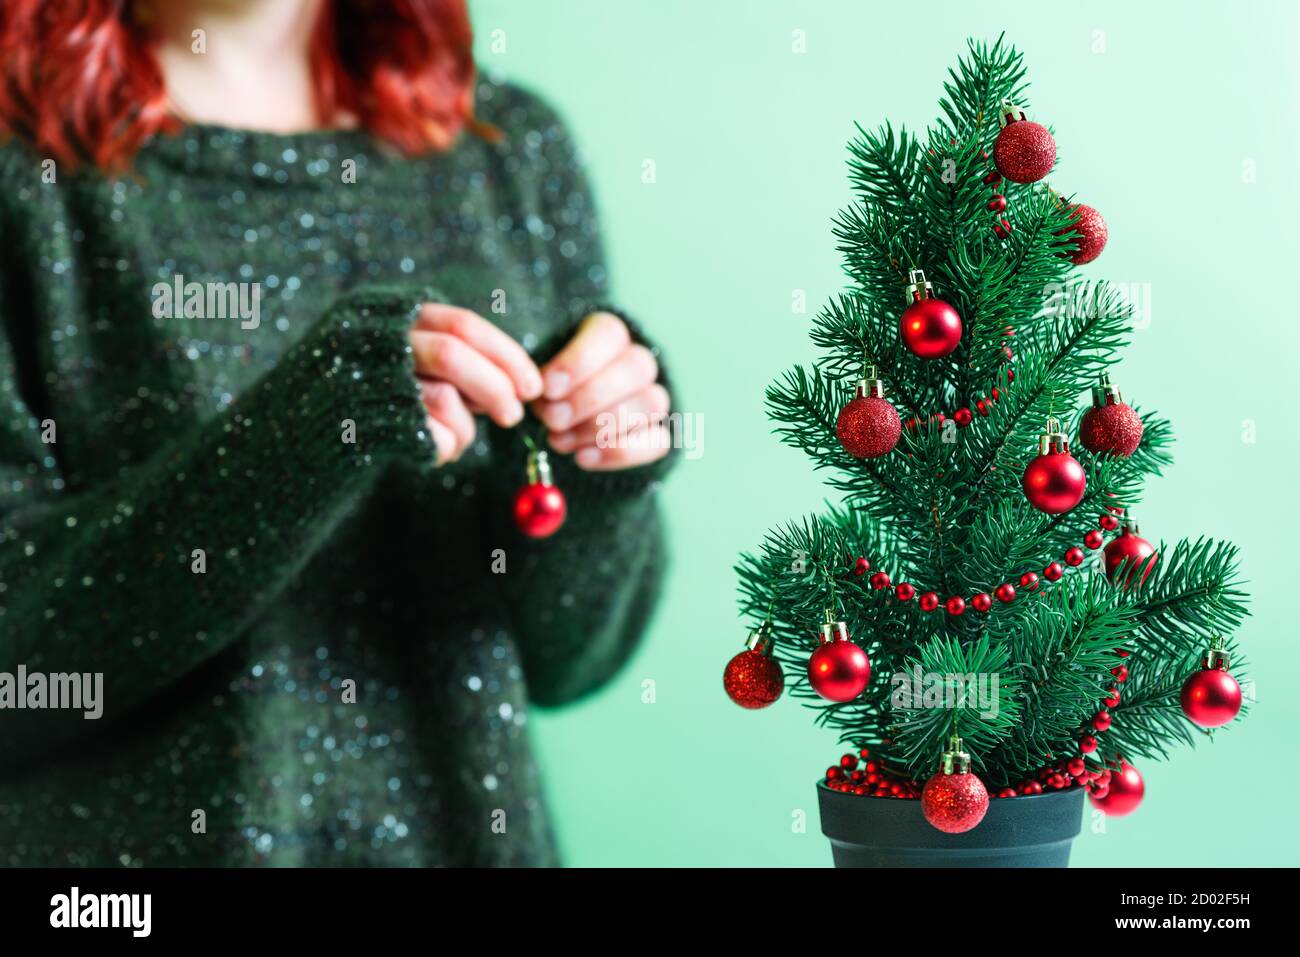 Little Christmas tree in a pot decorated with red Christmas baubles. Young girl in a green and cozy sweater decorating the Christmas tree. Stock Photo